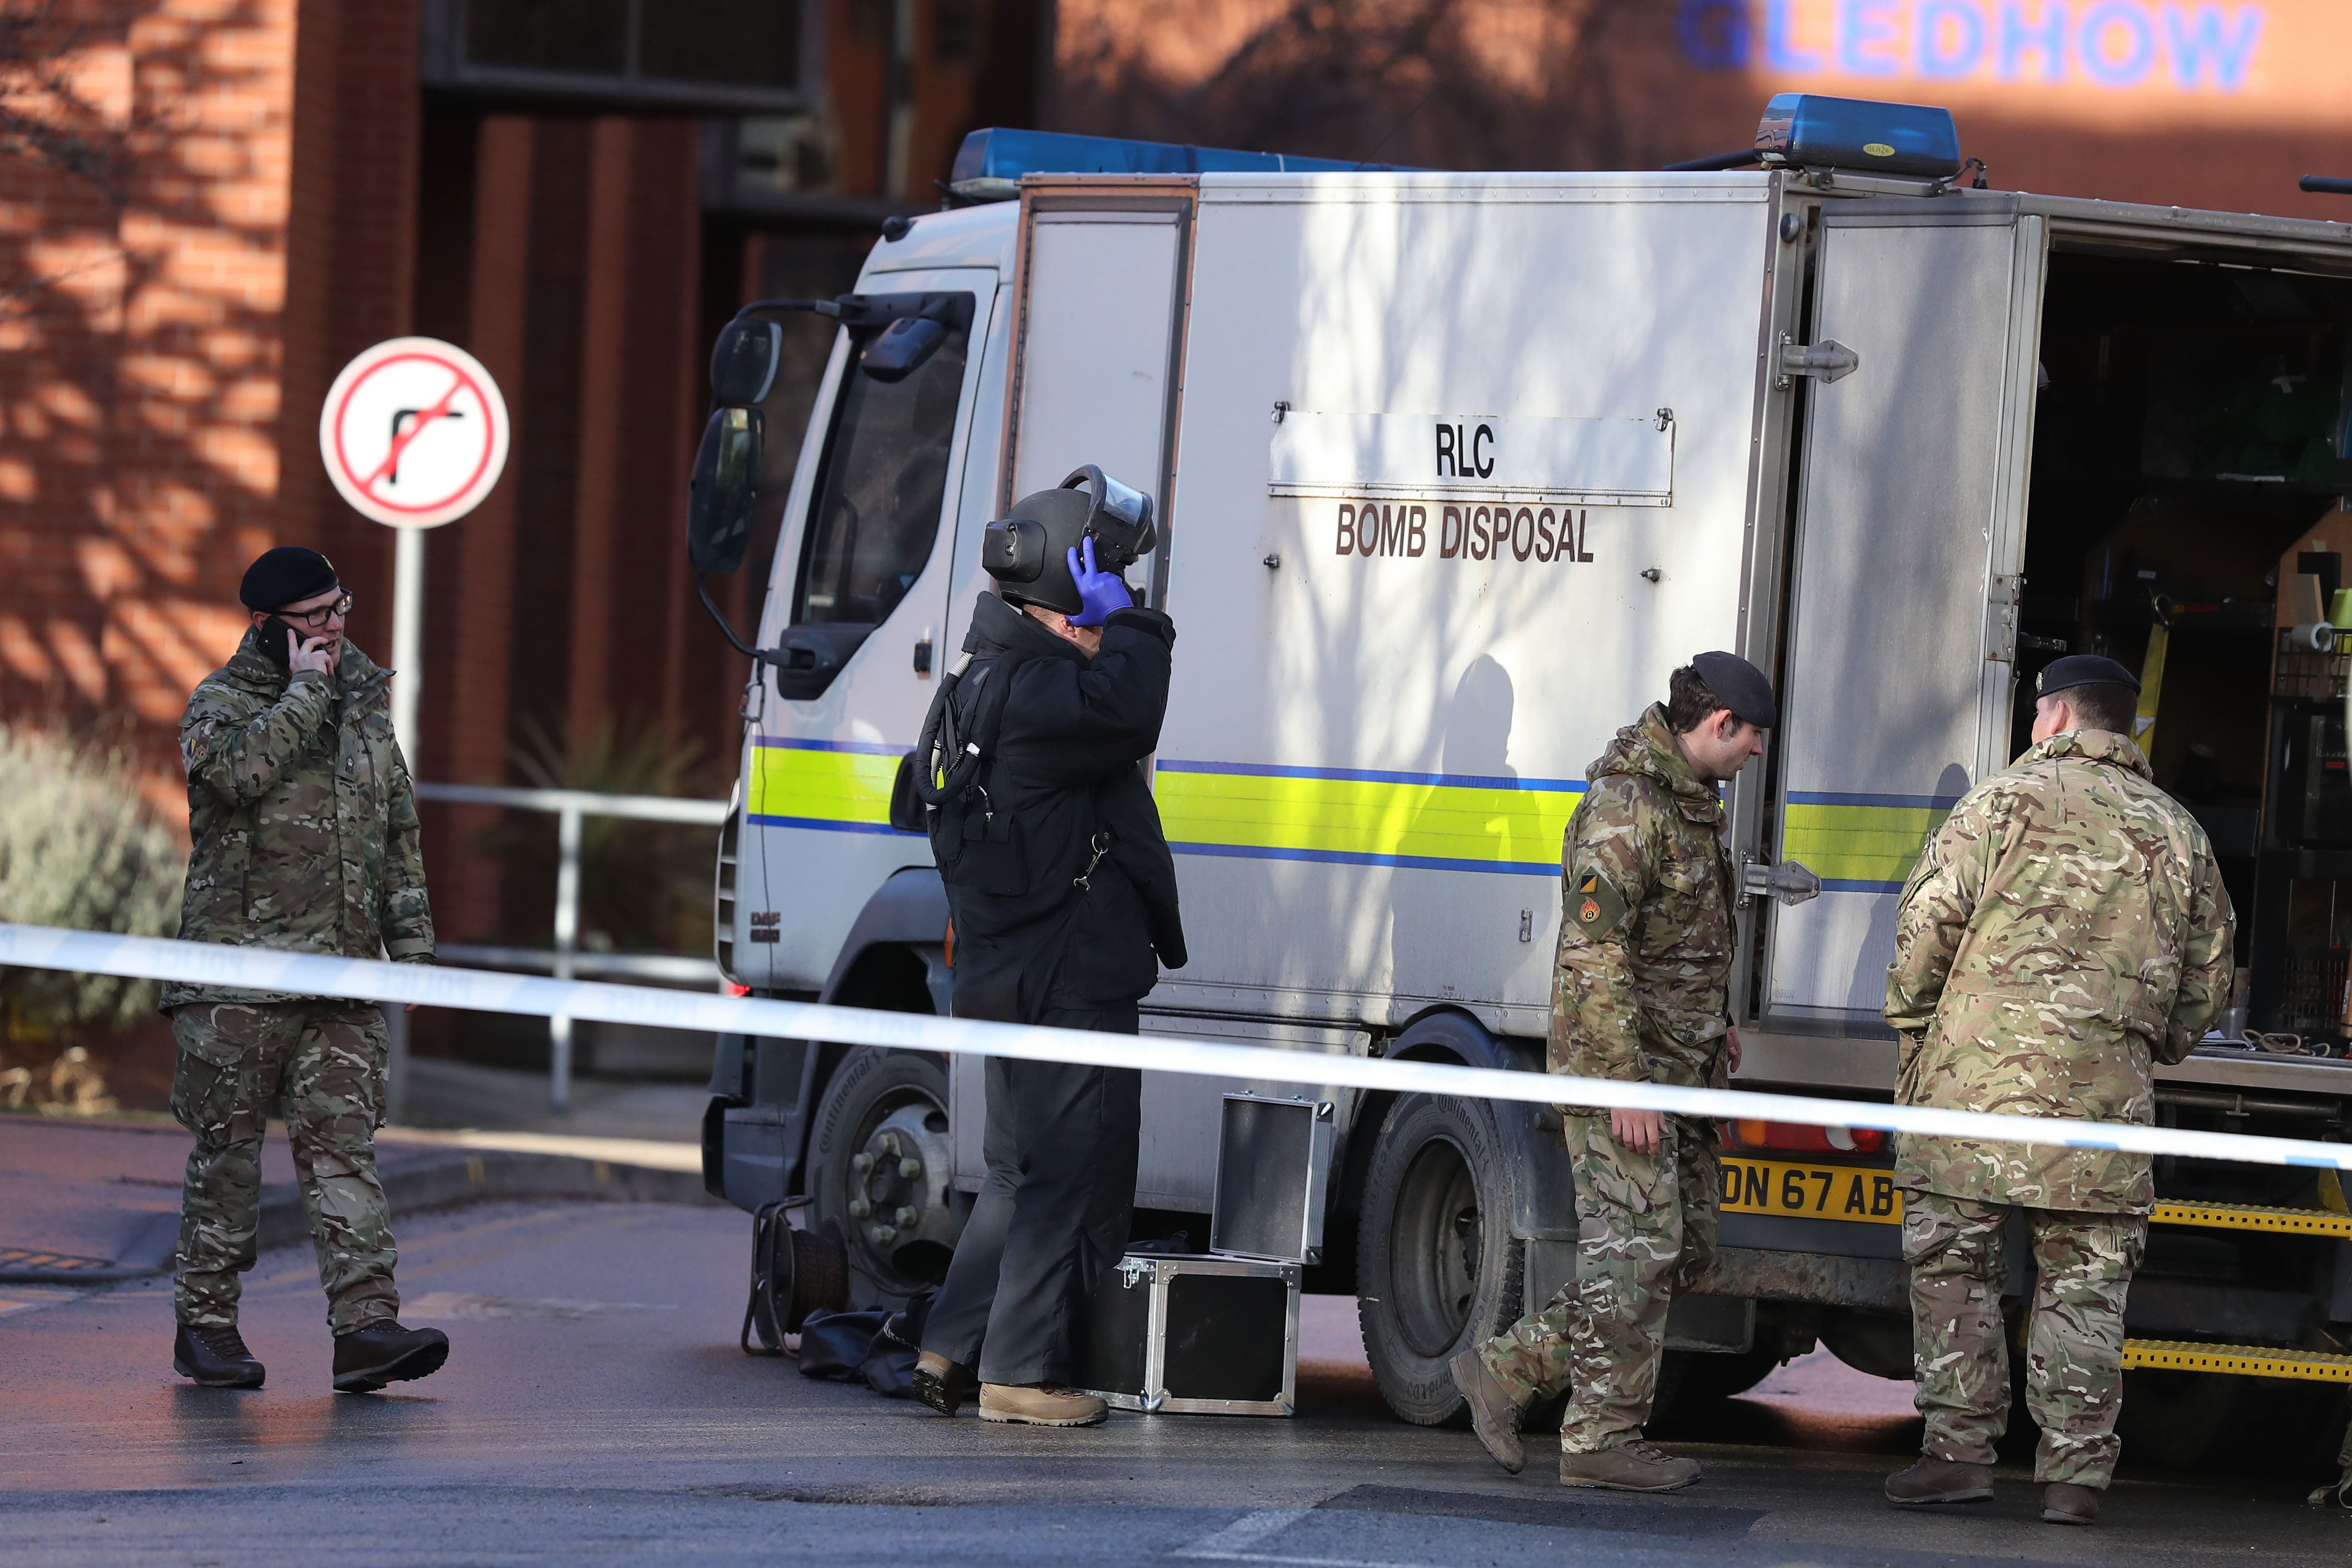 A bomb disposal unit at St James’s Hospital, Leeds, after patients and staff were evacuated (PA)